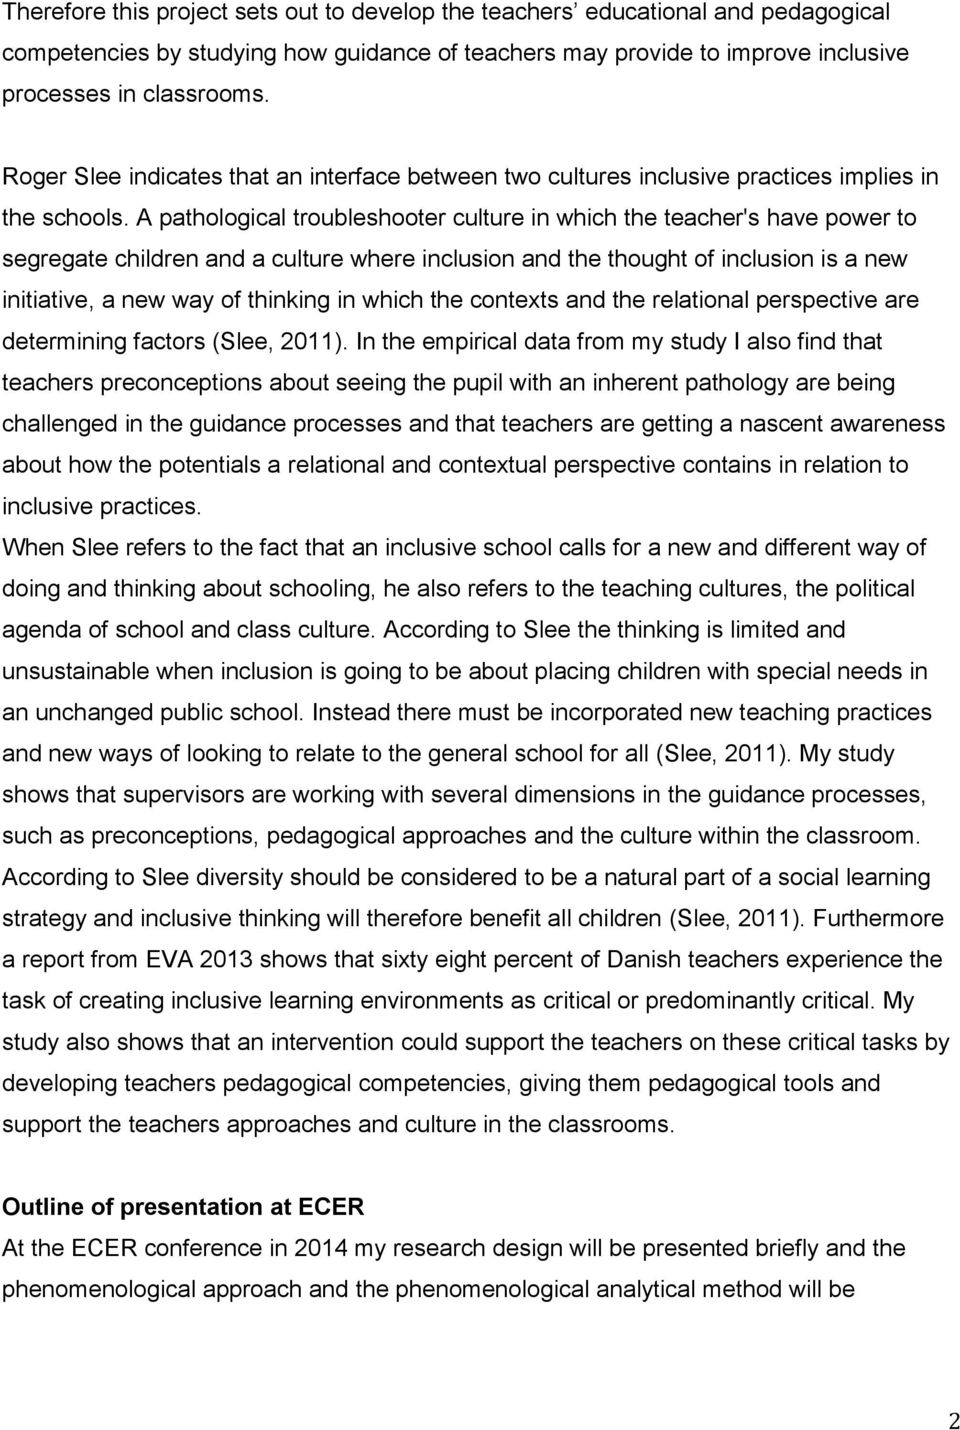 A pathological troubleshooter culture in which the teacher's have power to segregate children and a culture where inclusion and the thought of inclusion is a new initiative, a new way of thinking in